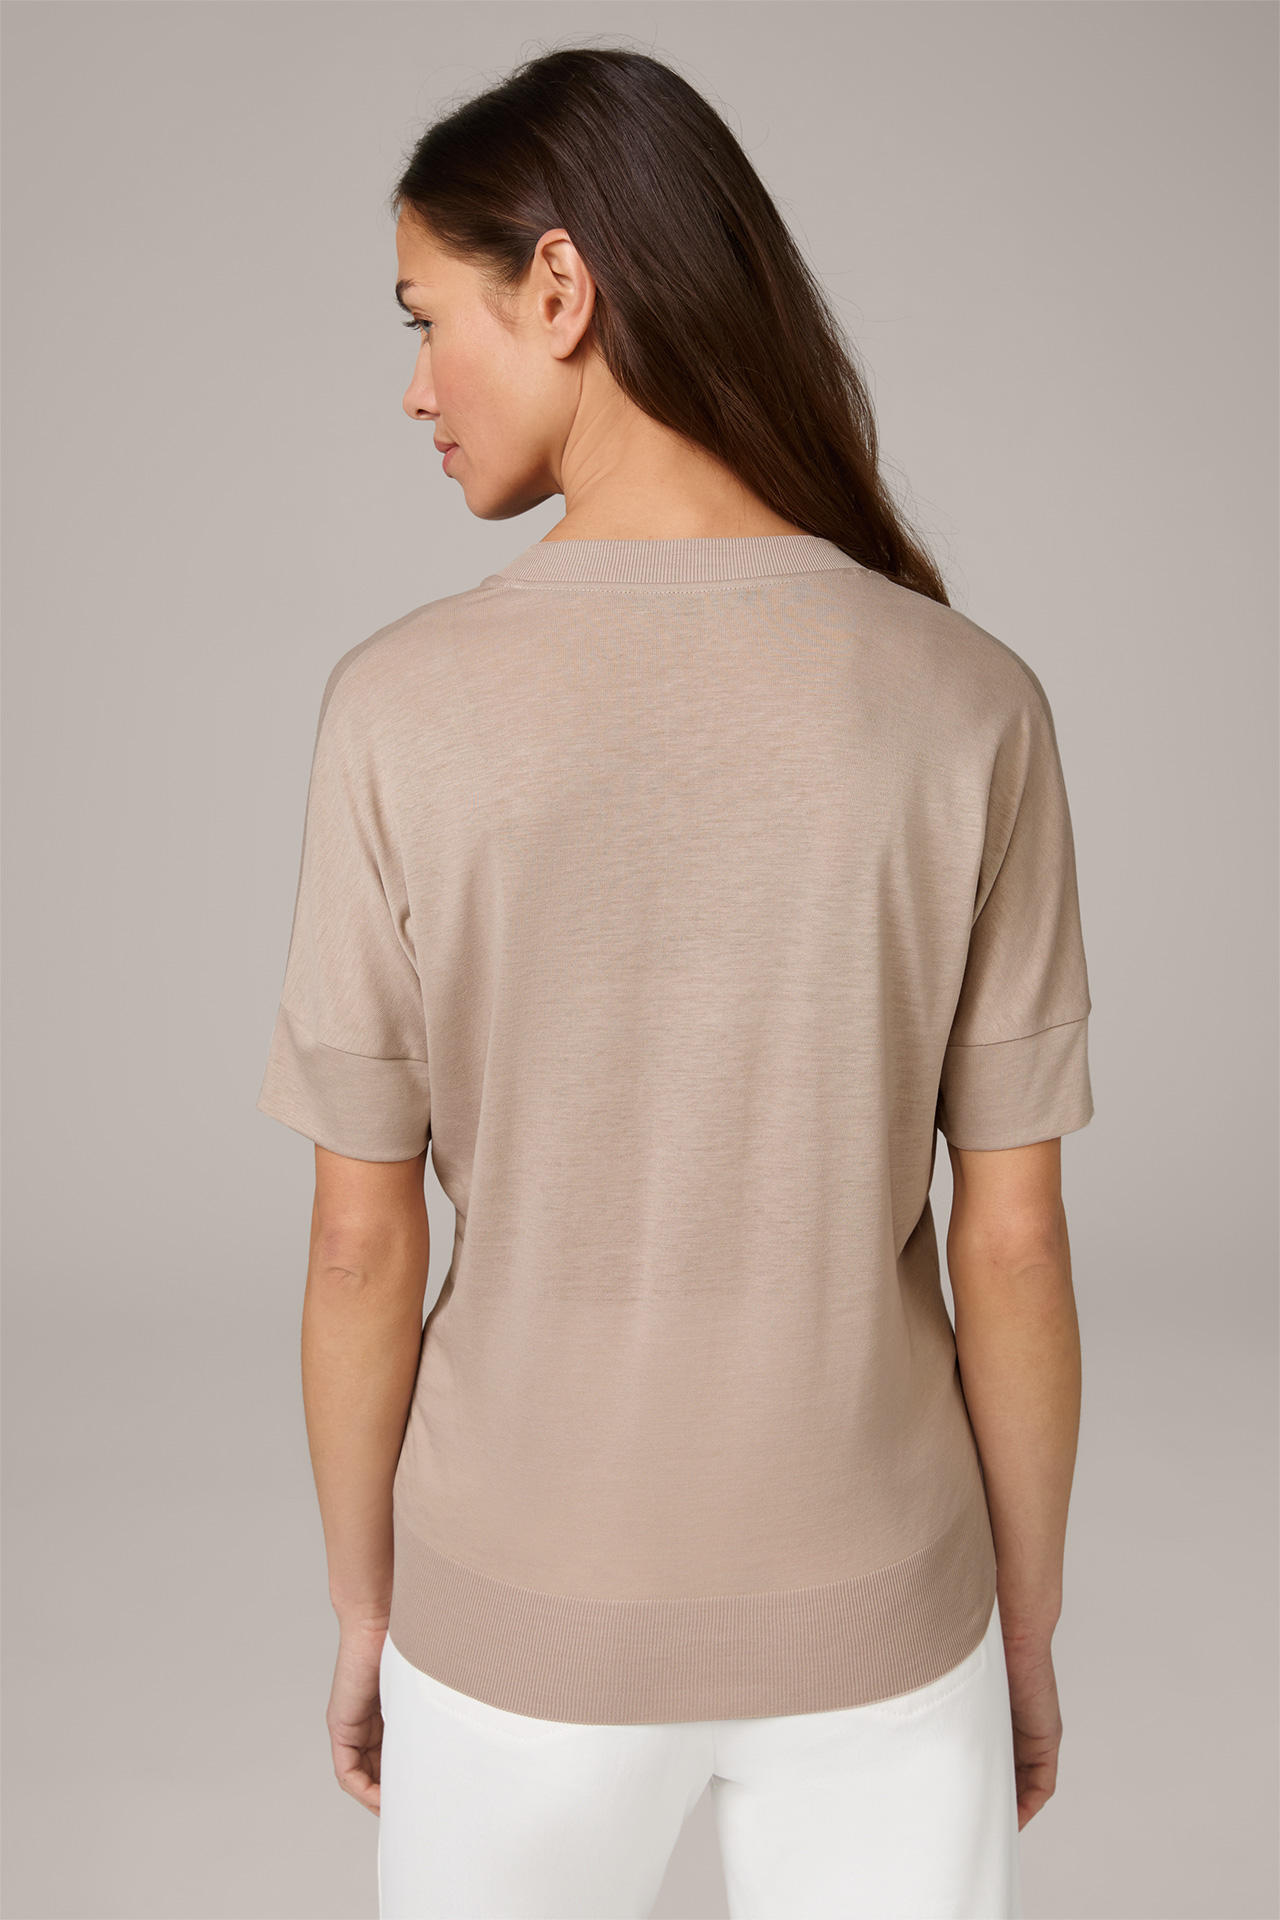 Tencel Cotton V-Neck Shirt in Taupe